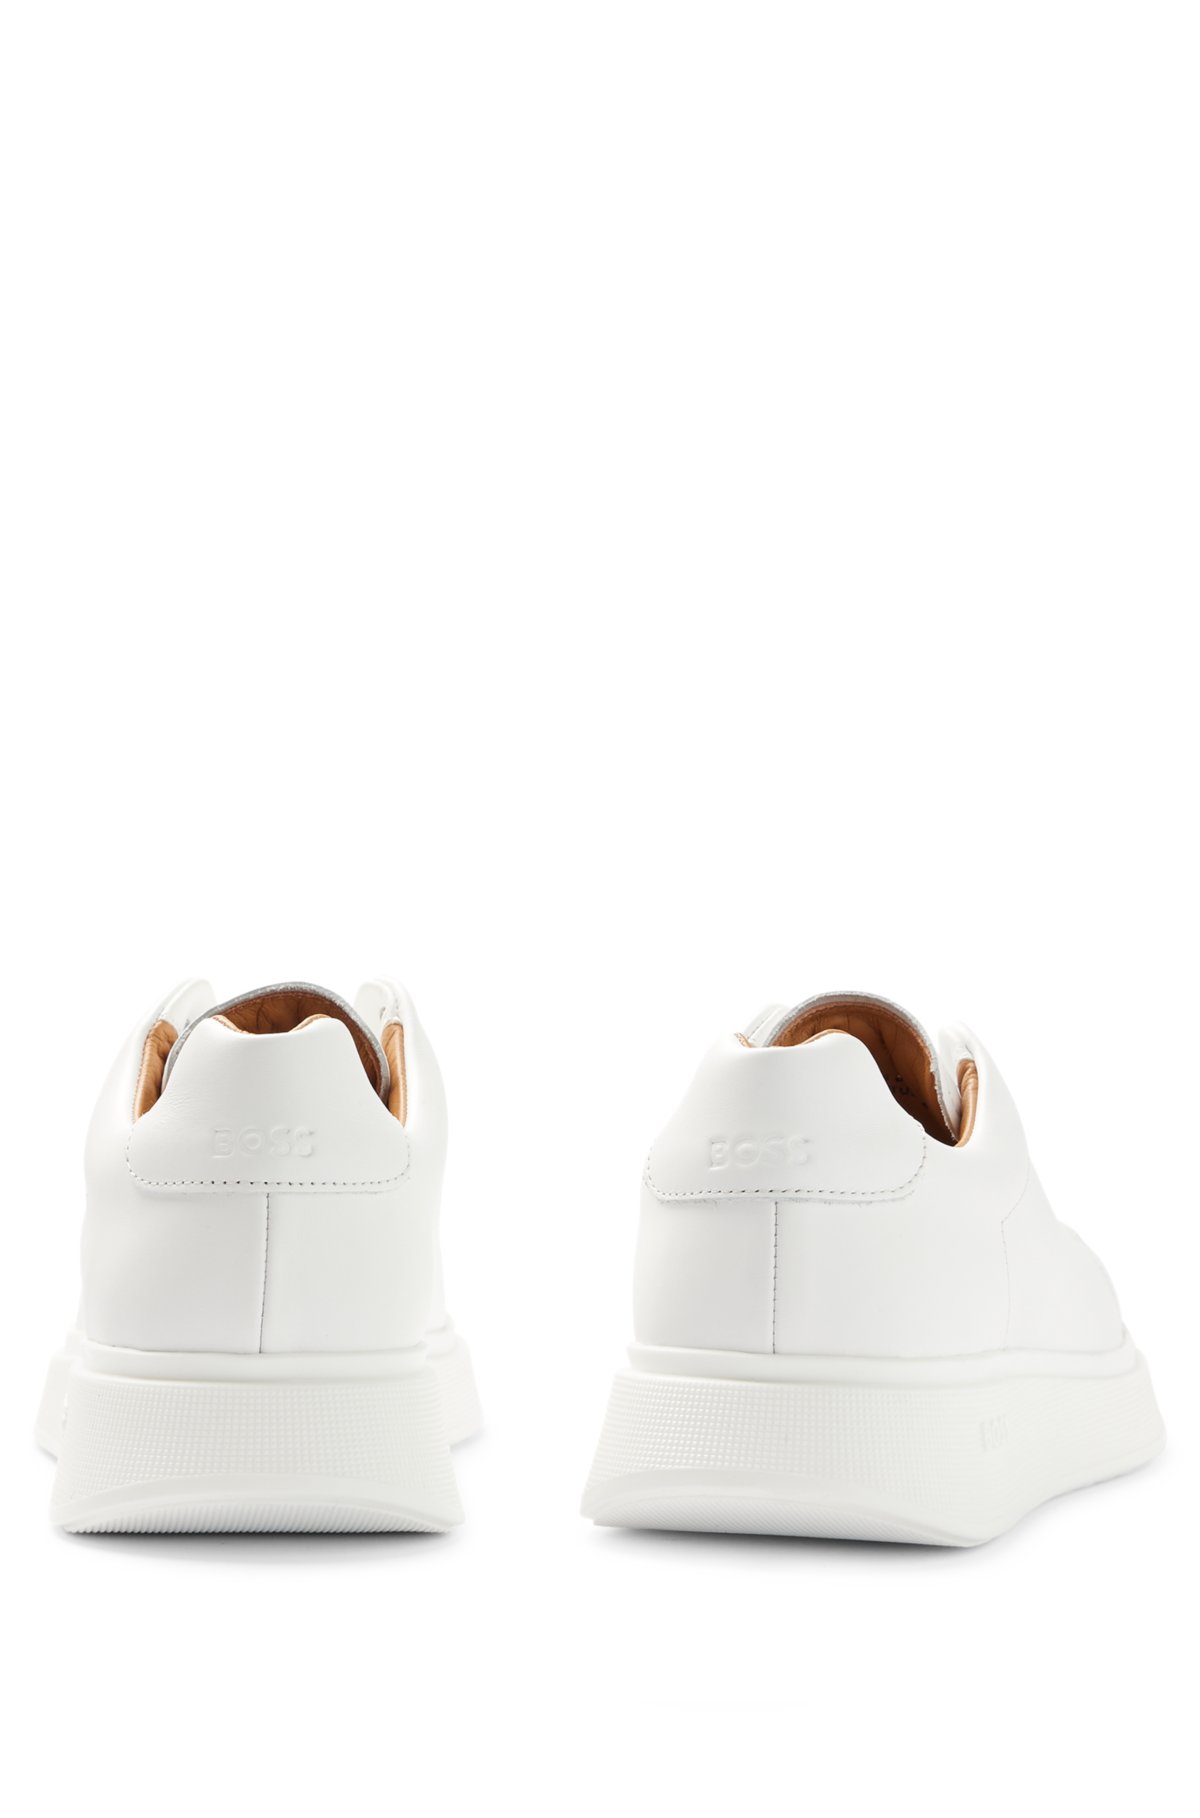 firkant Sanctuary tyngdekraft BOSS - Low-top trainers in leather with branded lace loop